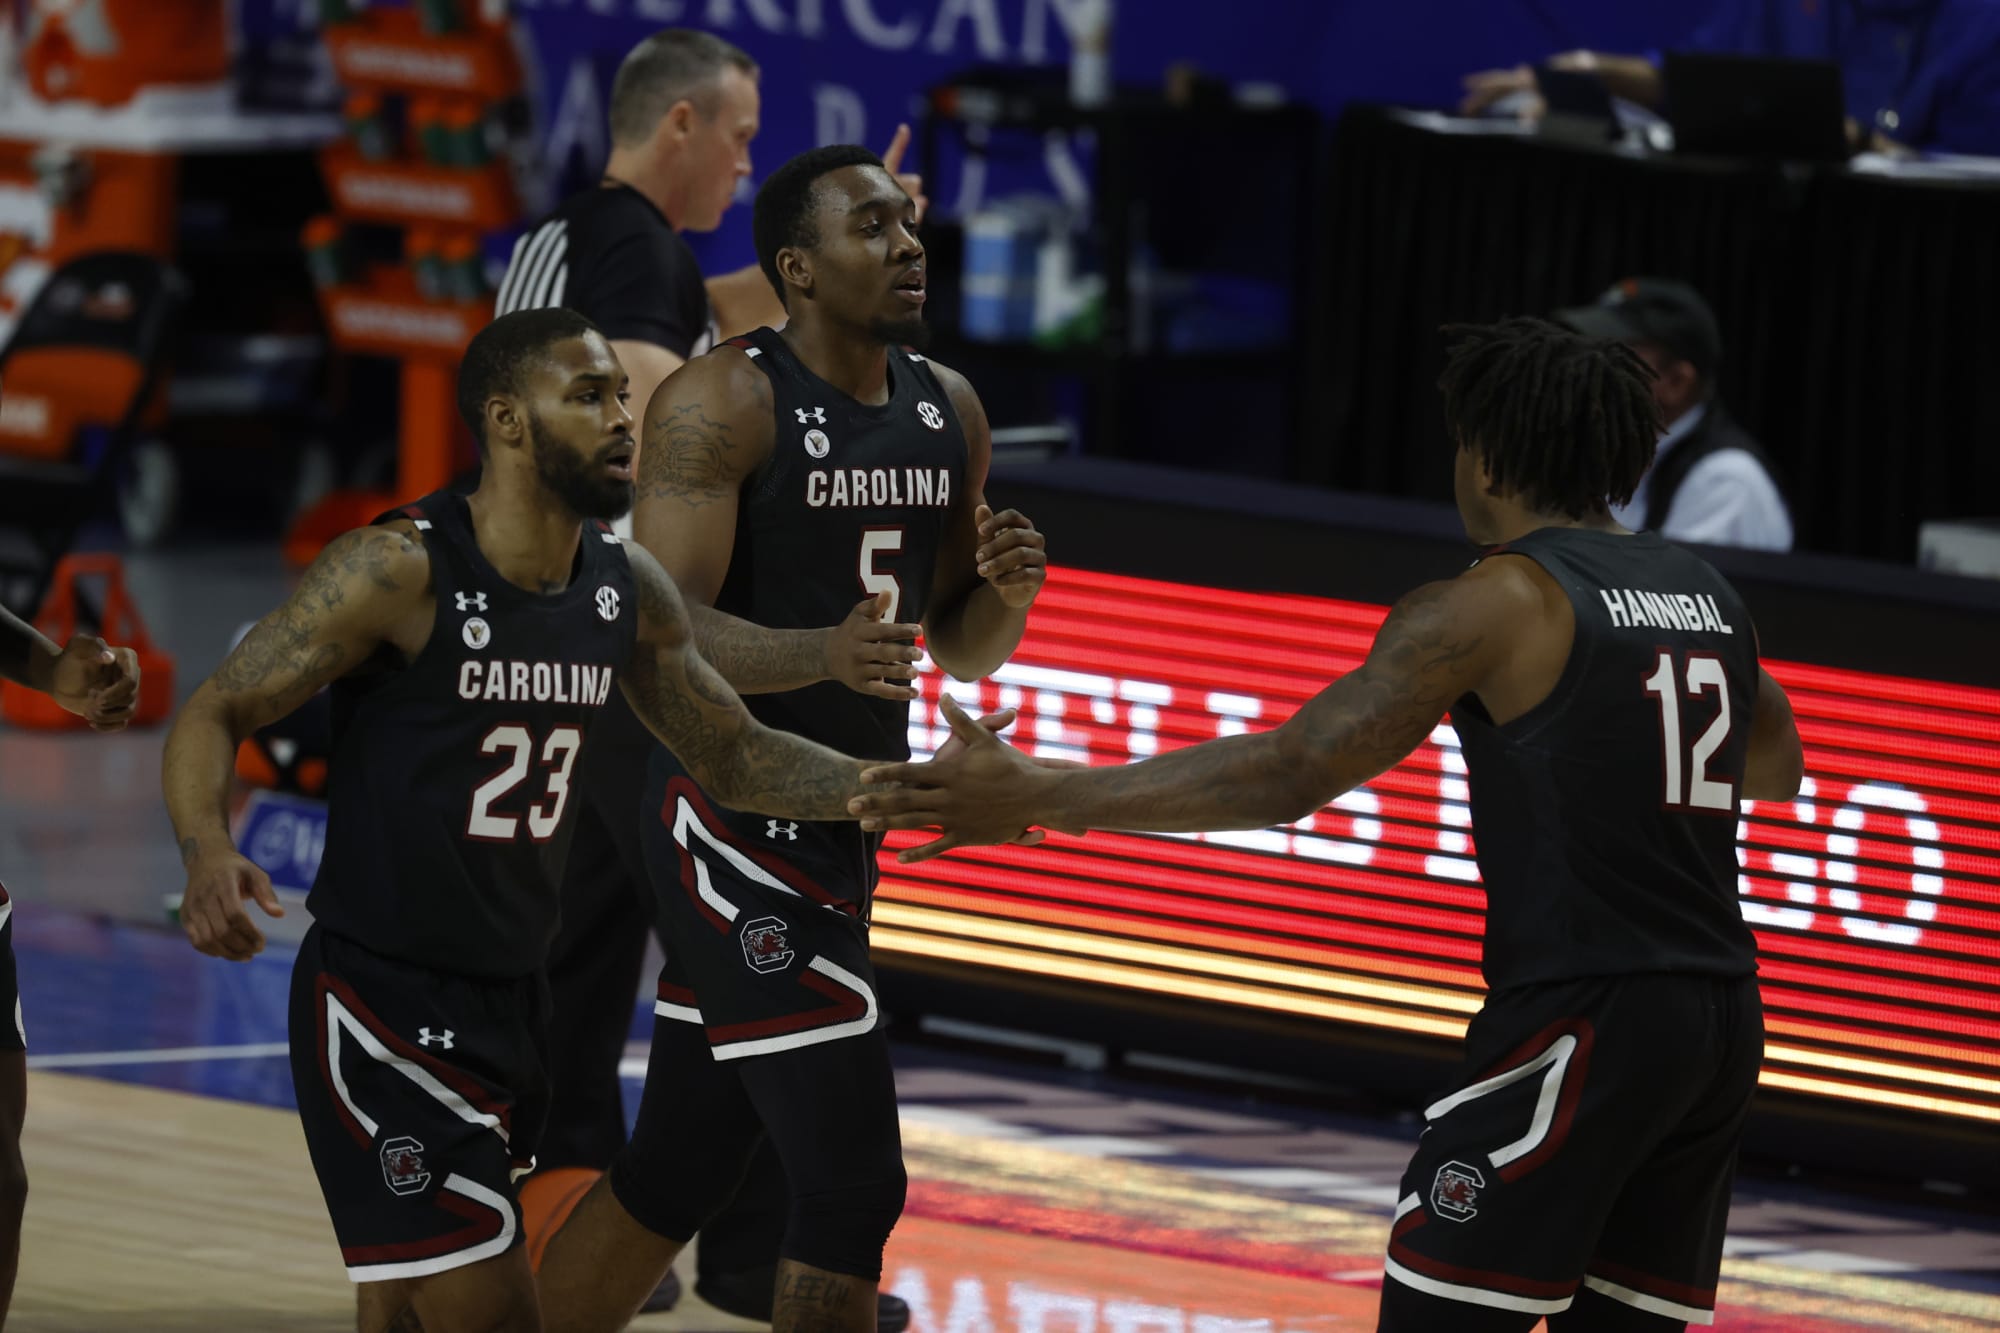 Gamecocks drops 22nd place in Florida